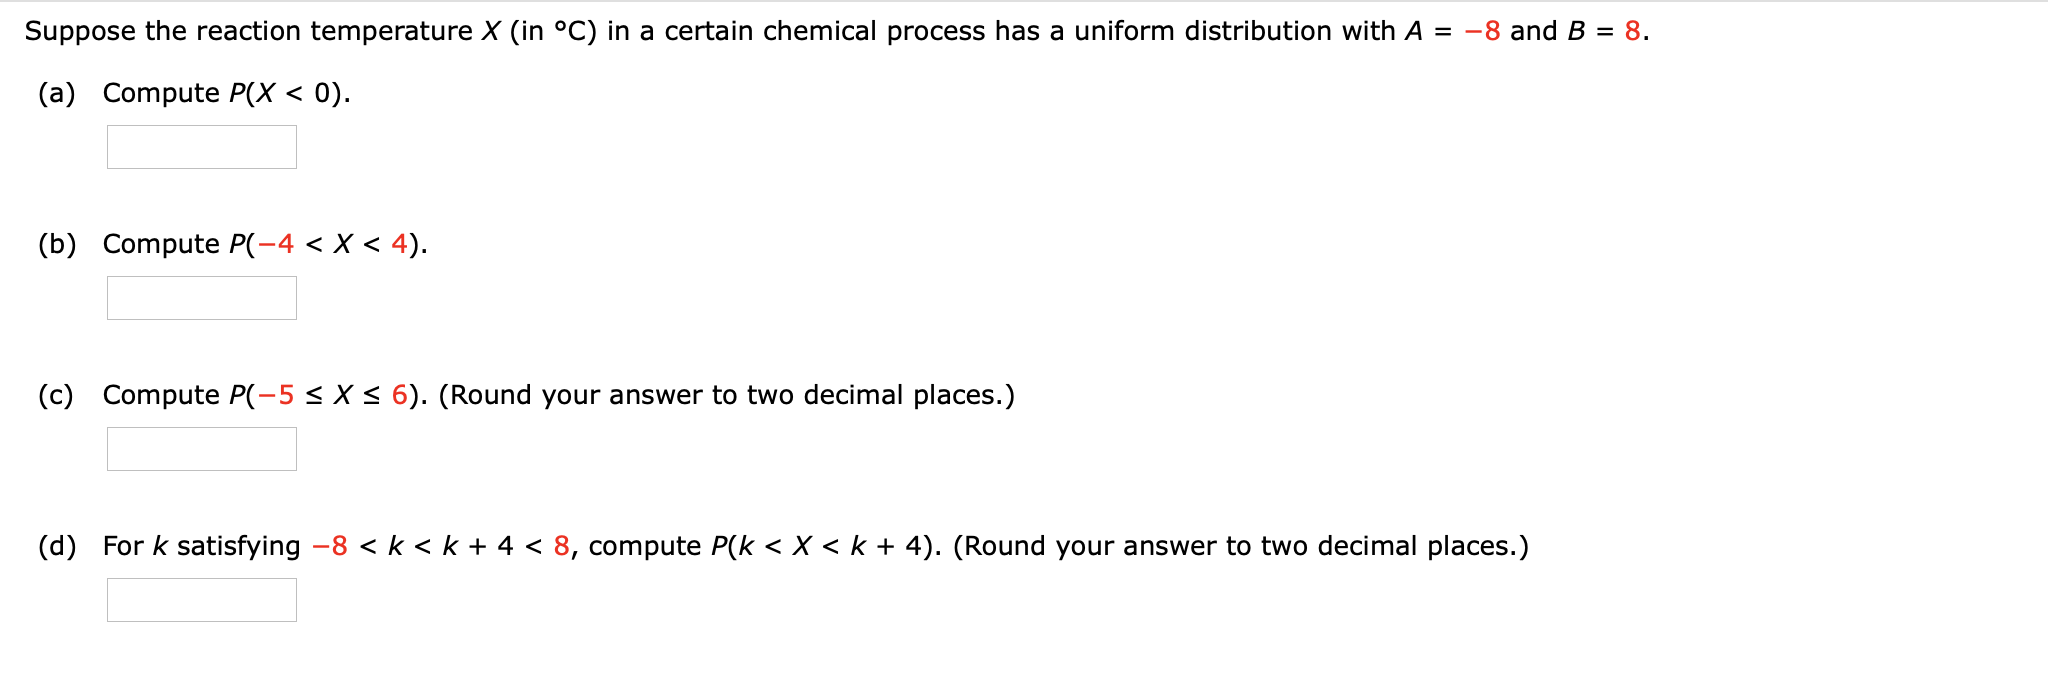 Suppose the reaction temperature X (in °C) in a certain chemical process has a uniform distribution with A
= -8 and B = 8.
(a) Compute P(X < 0).
(b) Compute P(-4 < X < 4).
(c) Compute P(-5 < X < 6). (Round your answer to two decimal places.)
(d) For k satisfying -8 < k < k + 4 < 8, compute P(k < X < k + 4). (Round your answer to two decimal places.)
